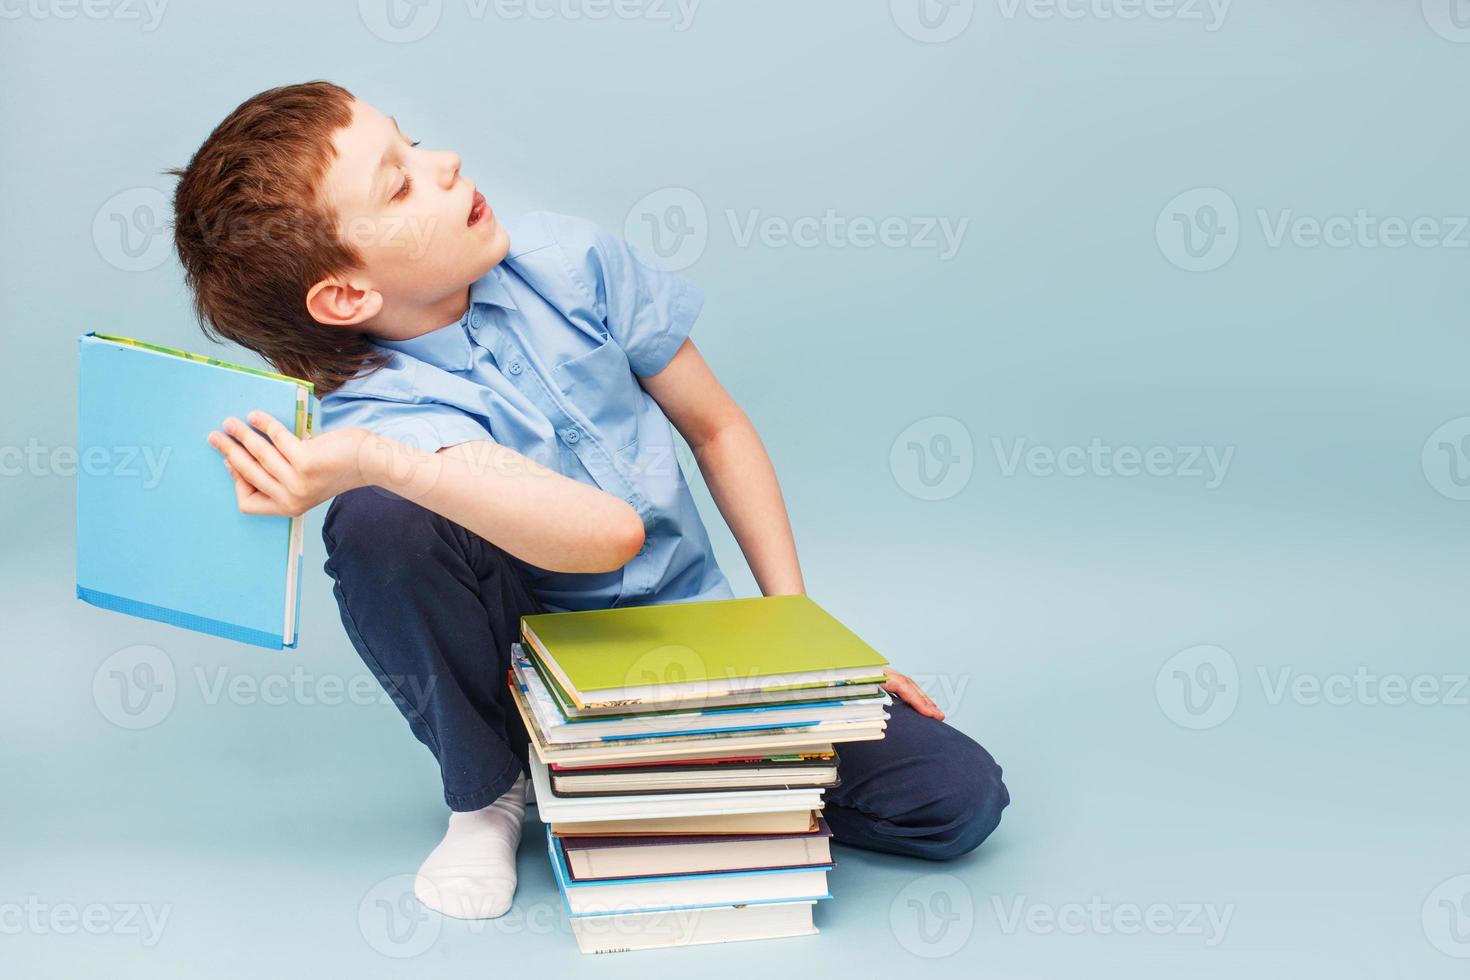 schoolboy sitting with pile of school books and throwing a textbook isolated on a blue background photo